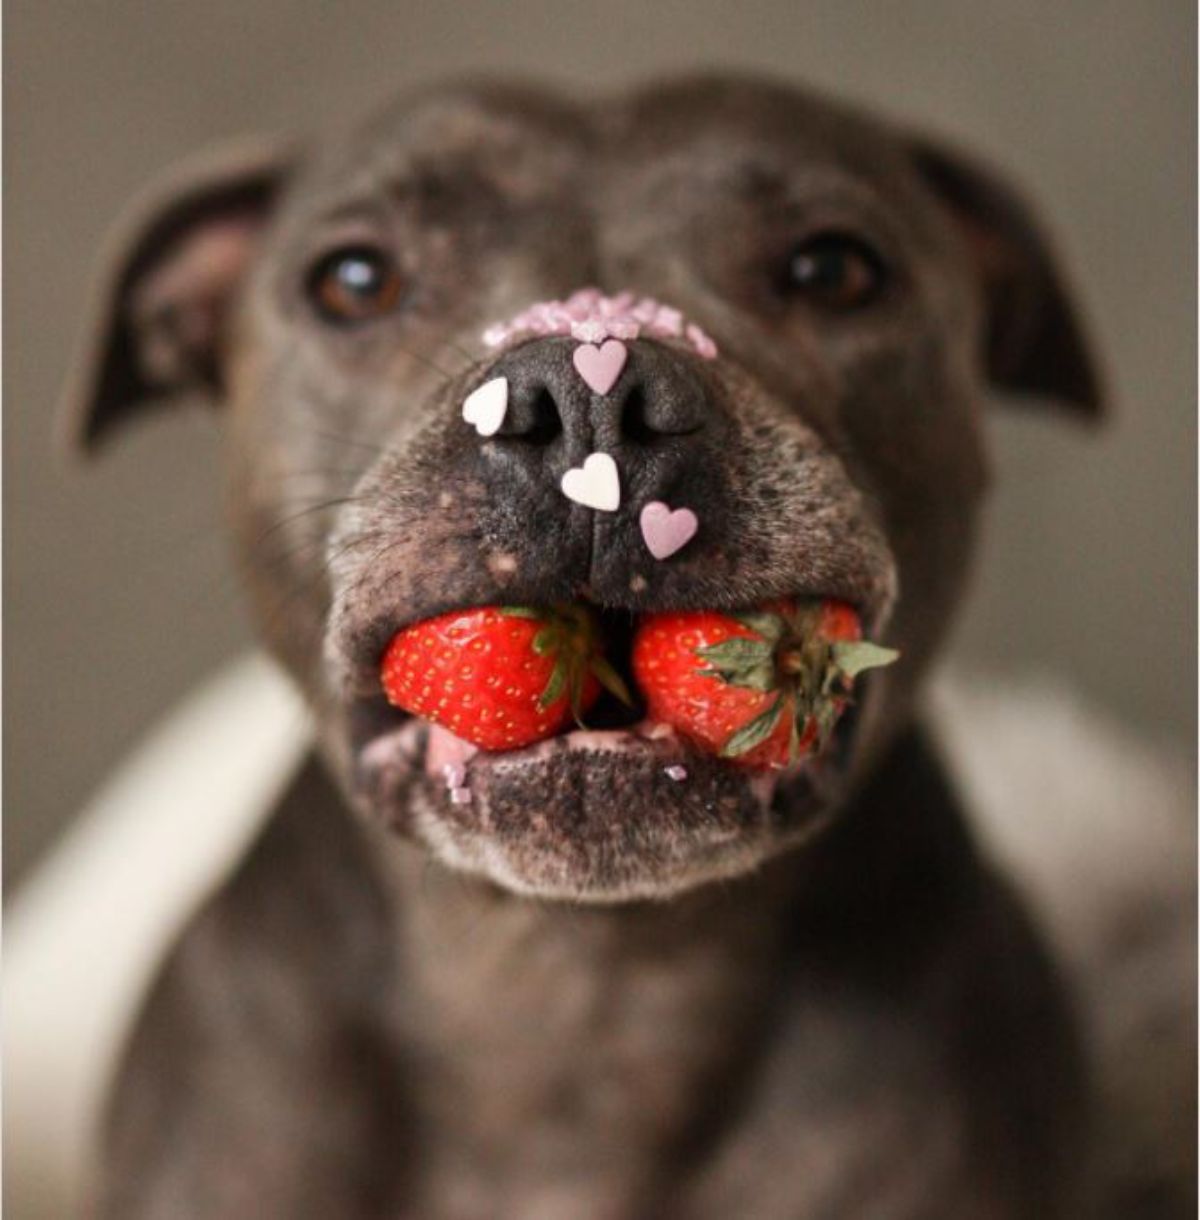 Staffordshire Bull Terrier with two strawberries in its mouth and pink heart sequins on its nose